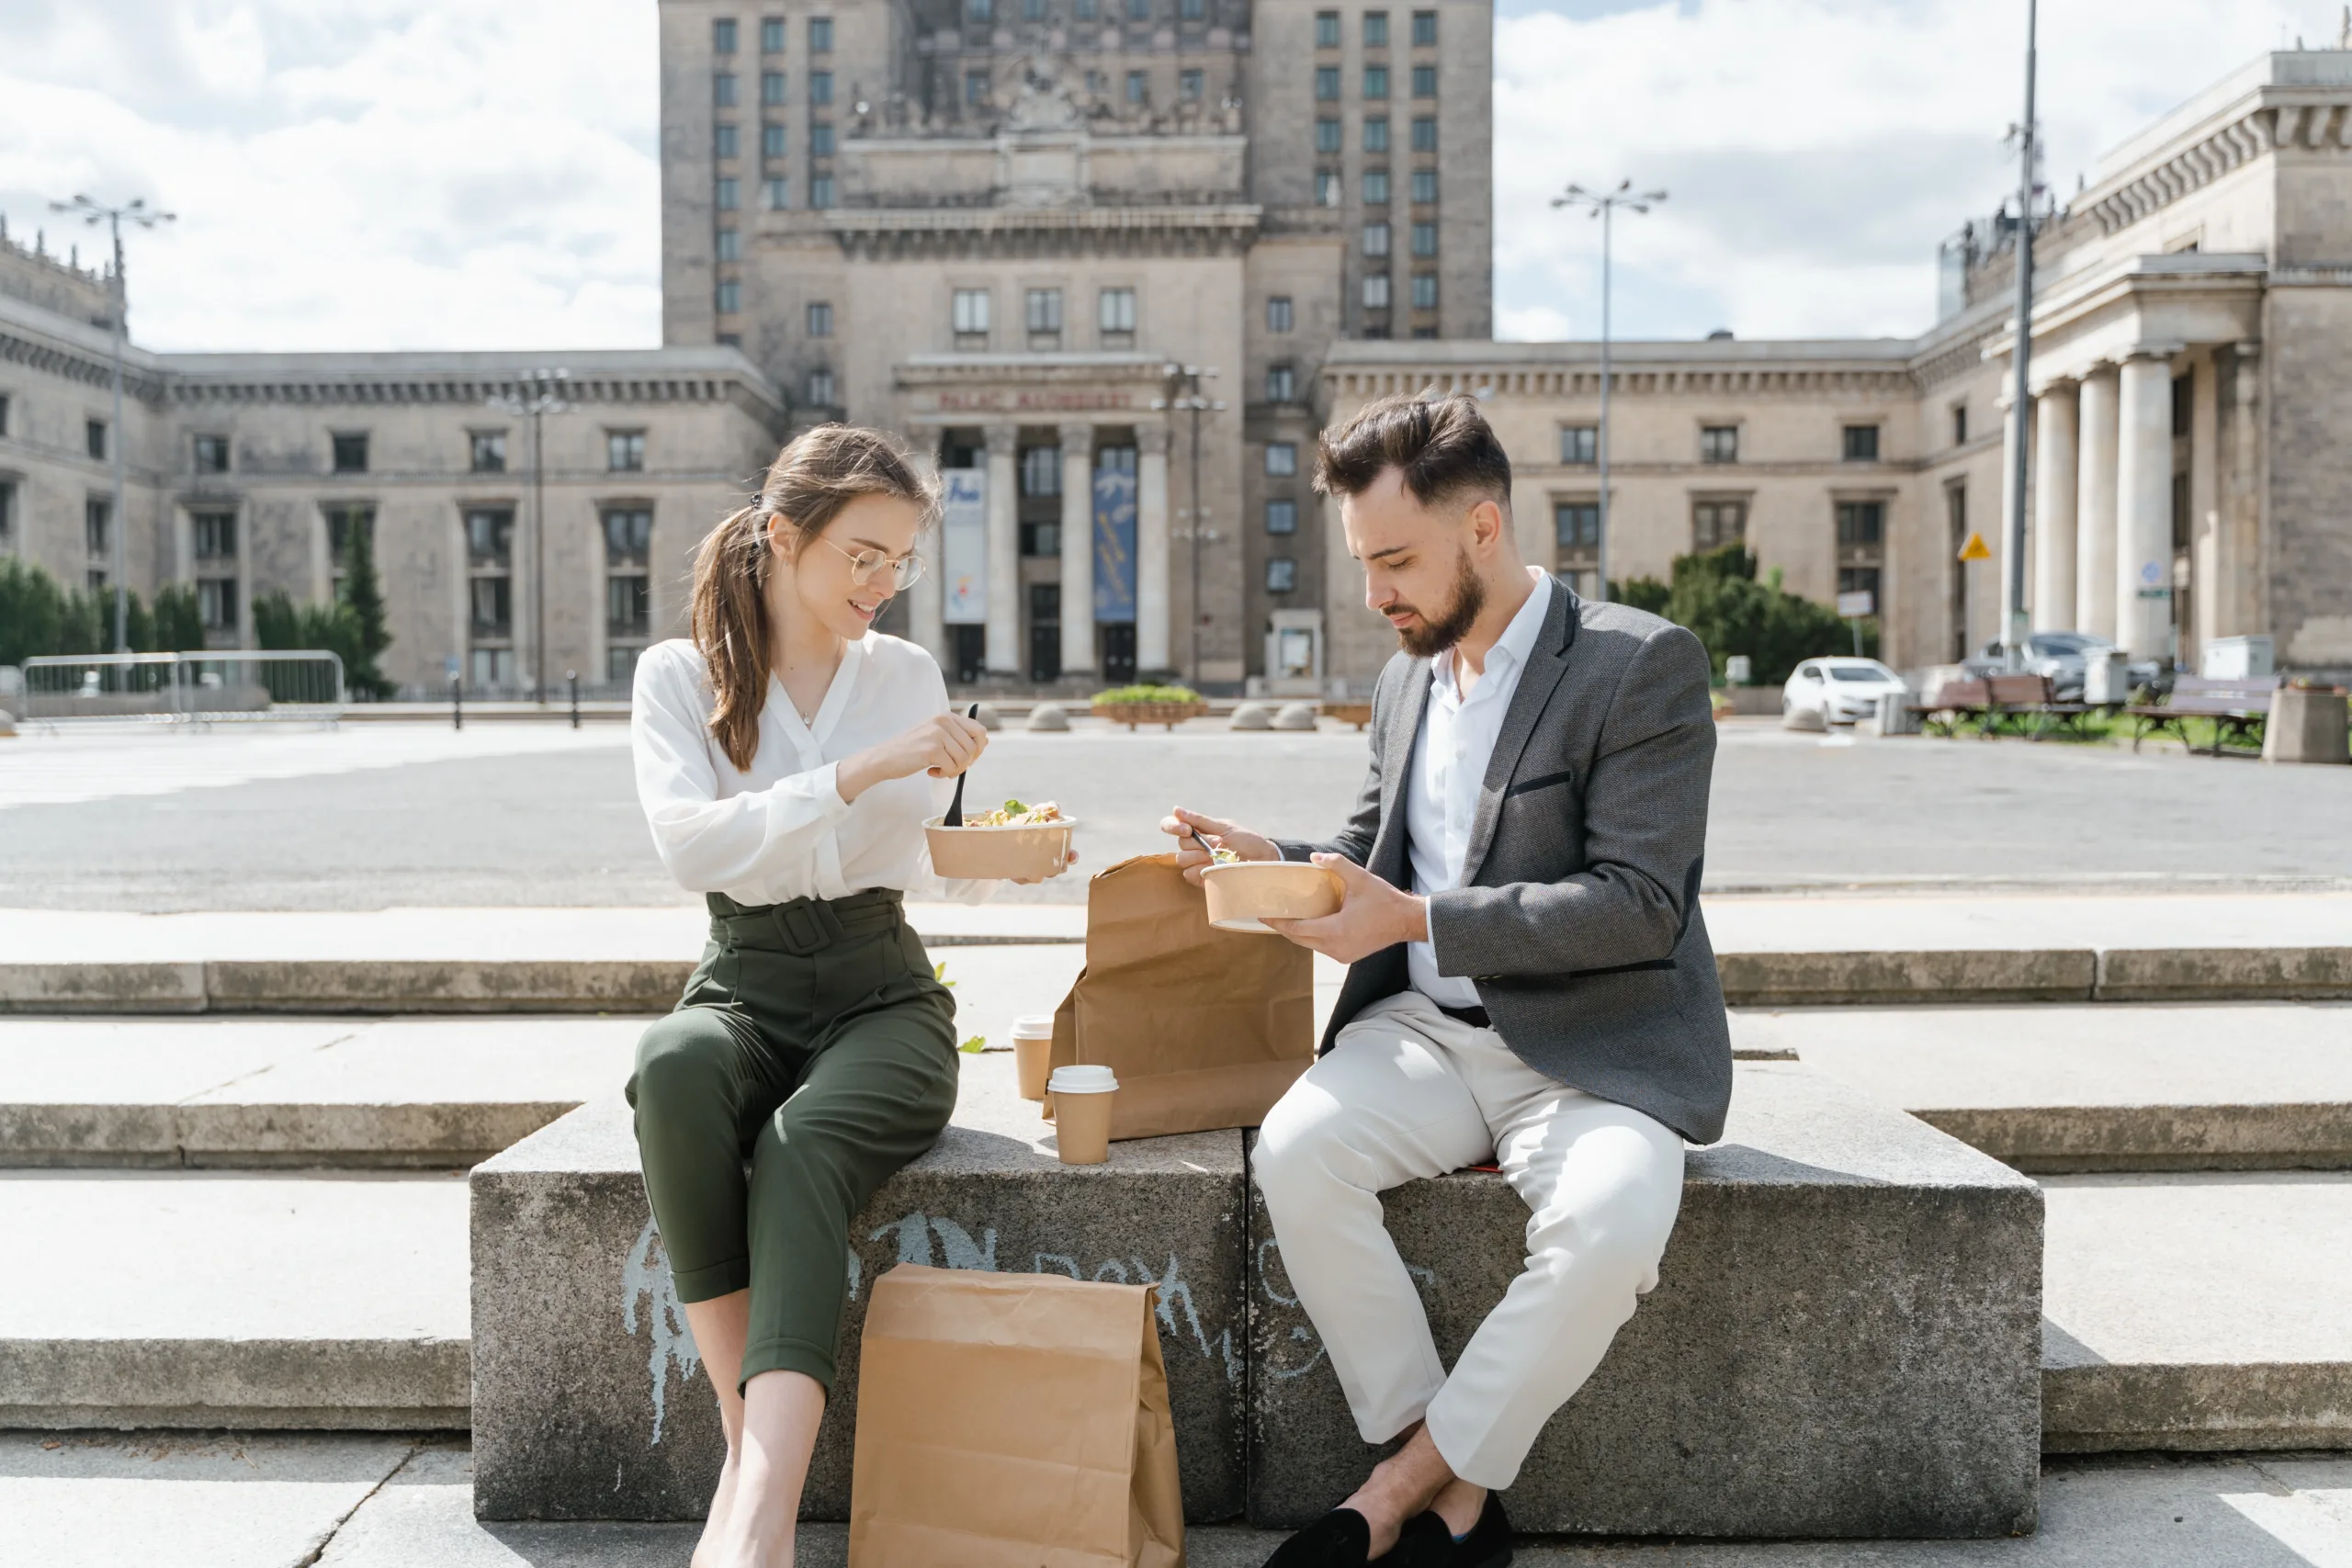 How to optimize a commercial kitchen for delivery and takeout? - Man and woman sitting on a stone bench and opening takeout bags. 